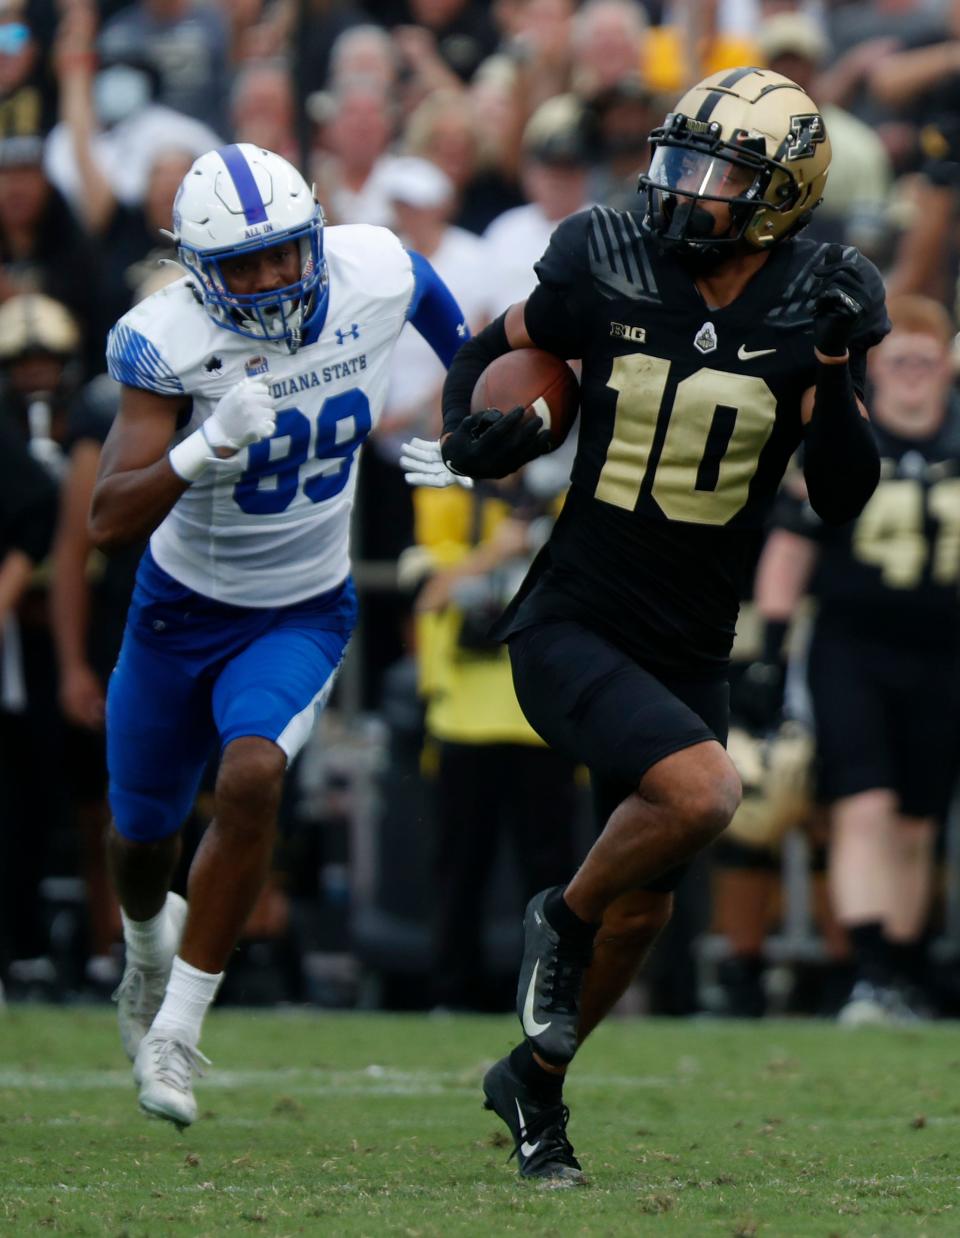 Purdue Boilermakers safety Cam Allen (10) returns an interception for a touchdown during the NCAA football game against the Indiana State Sycamores, Saturday, Sept. 10, 2022, at Ross-Ade Stadium in West Lafayette, Ind. Purdue won 56-0.